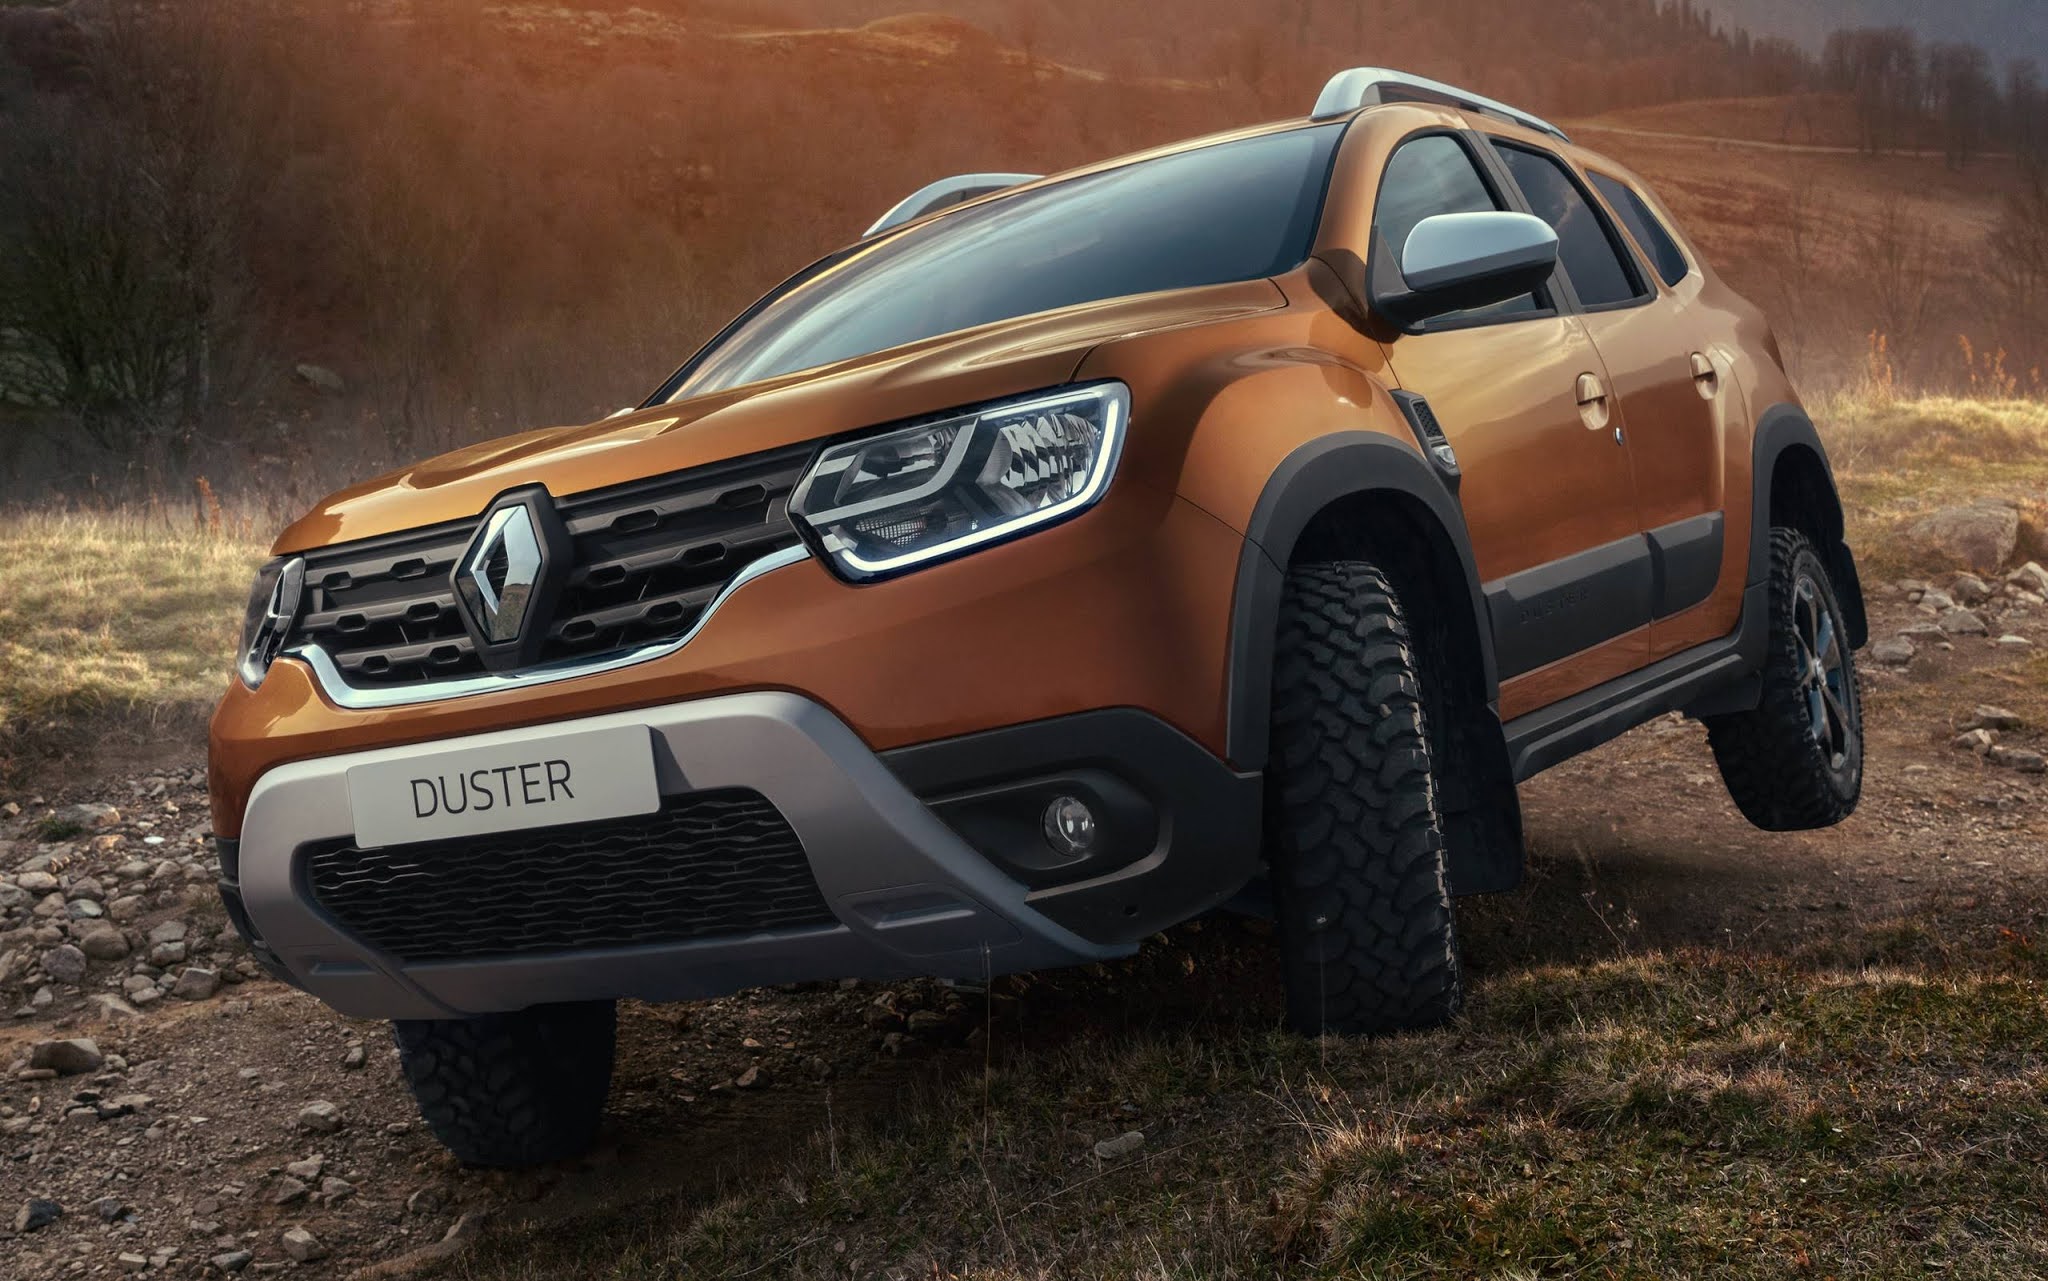 Рено дастер 2.0 4wd. Renault Duster 2021. Рено Дастер 2022. Новый Рено Дастер 2021. Новый Рено Дастер 2022.